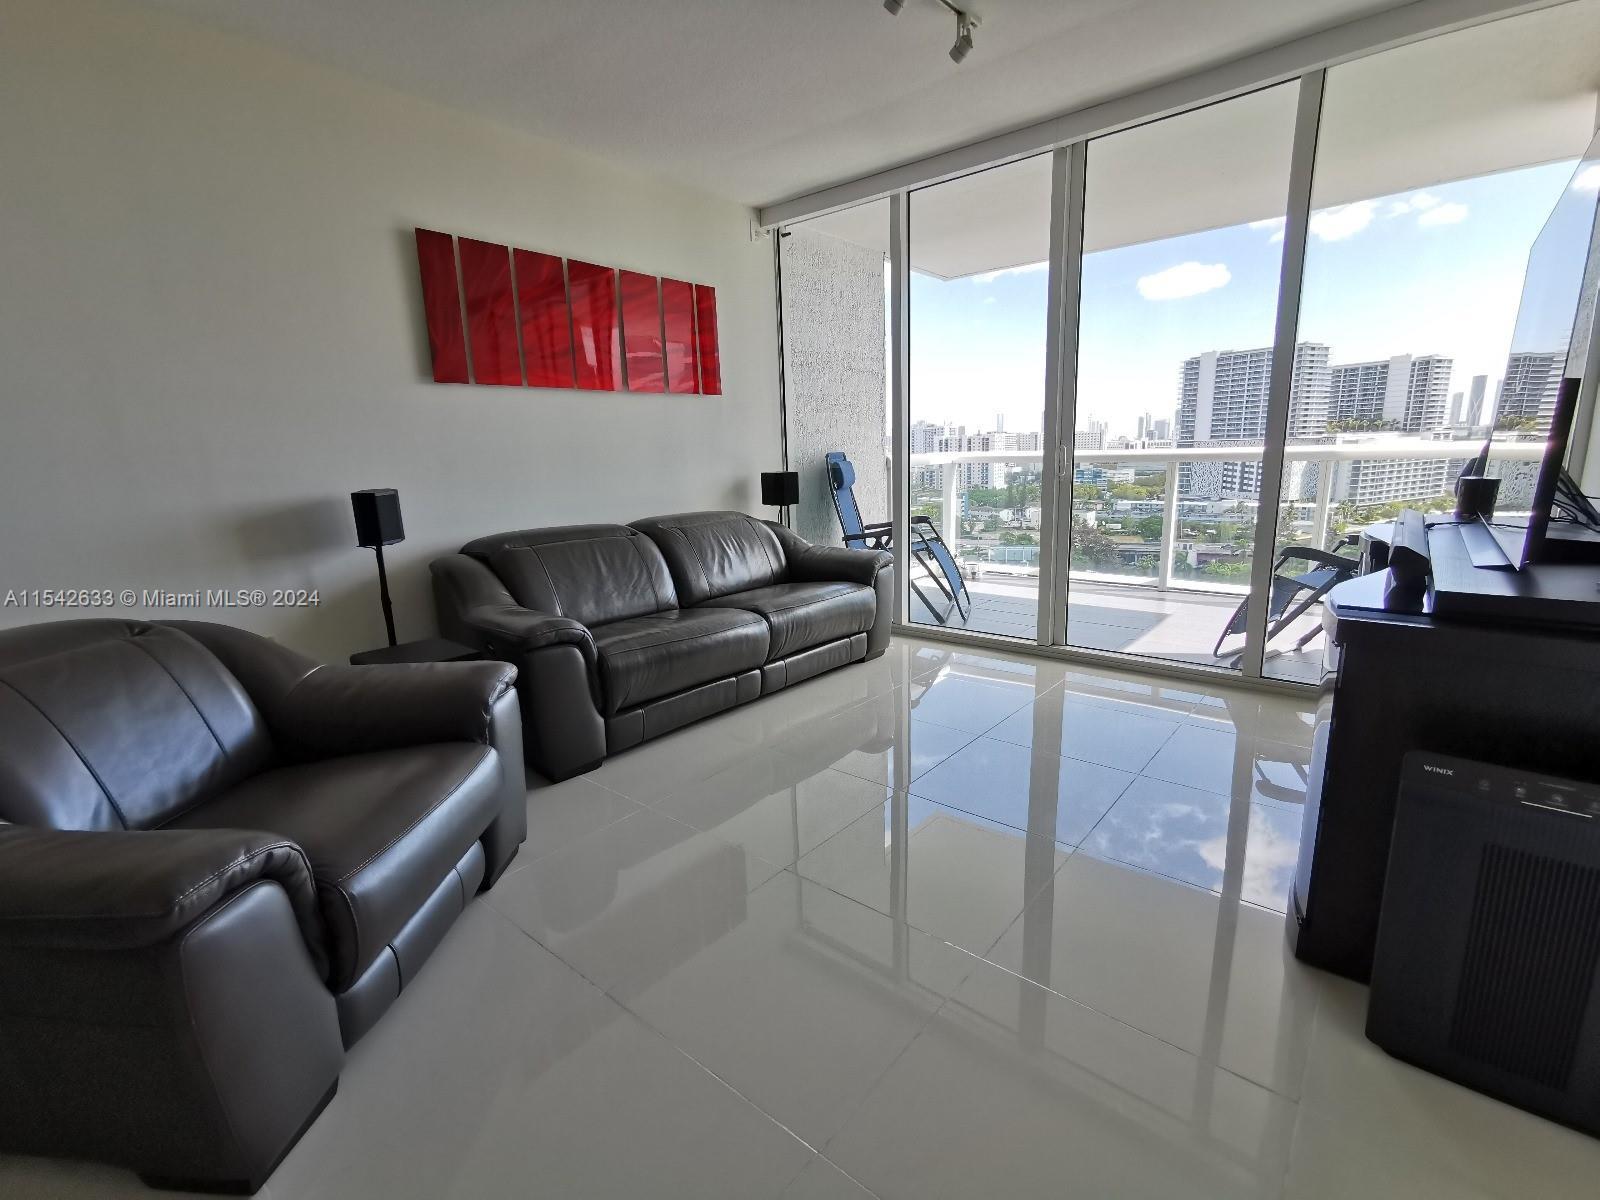 Photo of 1861 NW S River Dr #1810 in Miami, FL